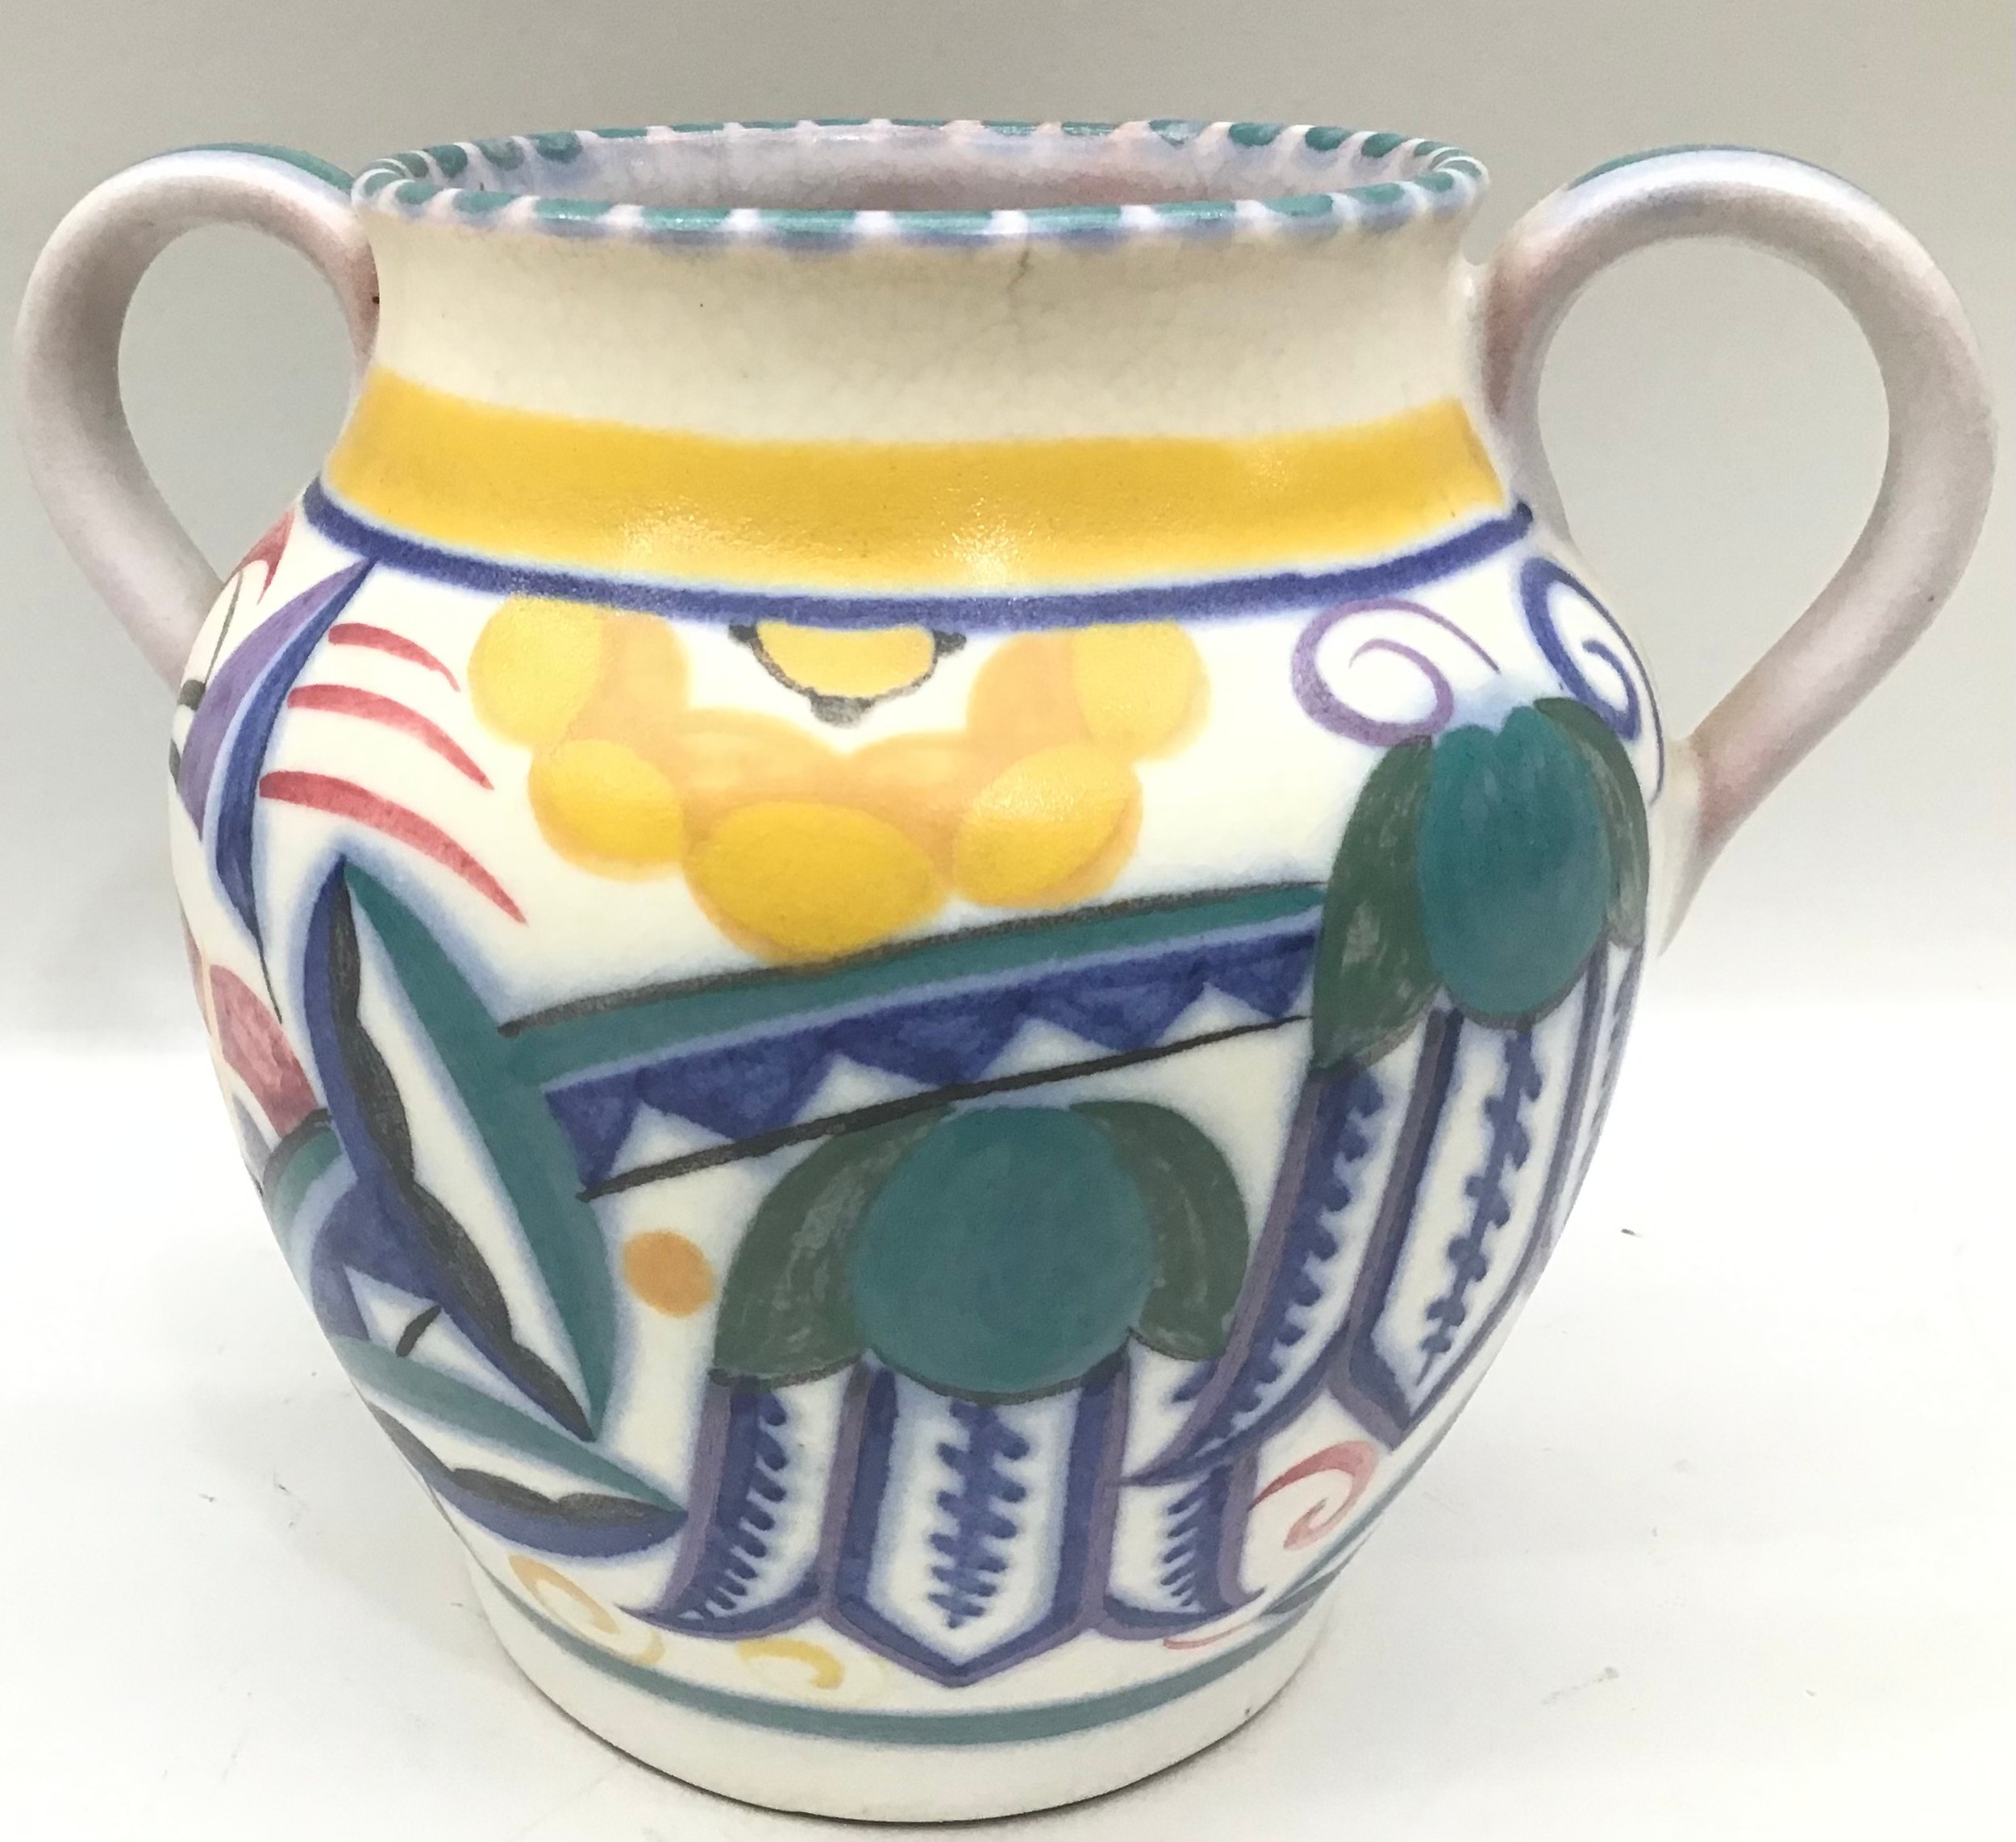 Poole Pottery shape 401 TY pattern twin handled vase decorated by Marian Heath 4.9" high. - Image 3 of 6